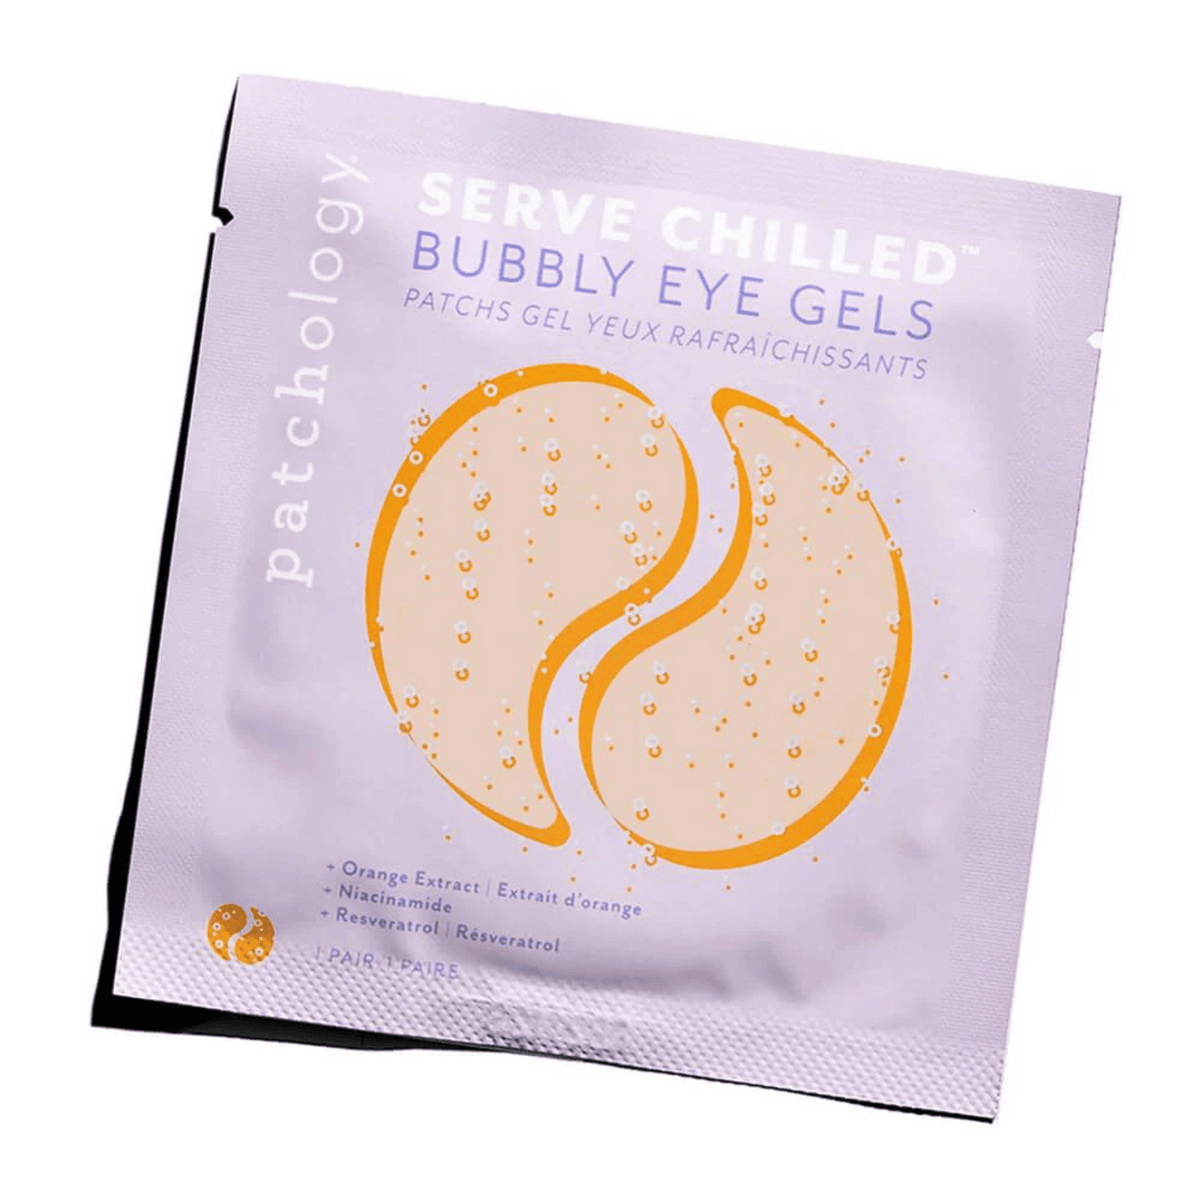 Alternate Image of Served Chilled Bubbly Eye Gels